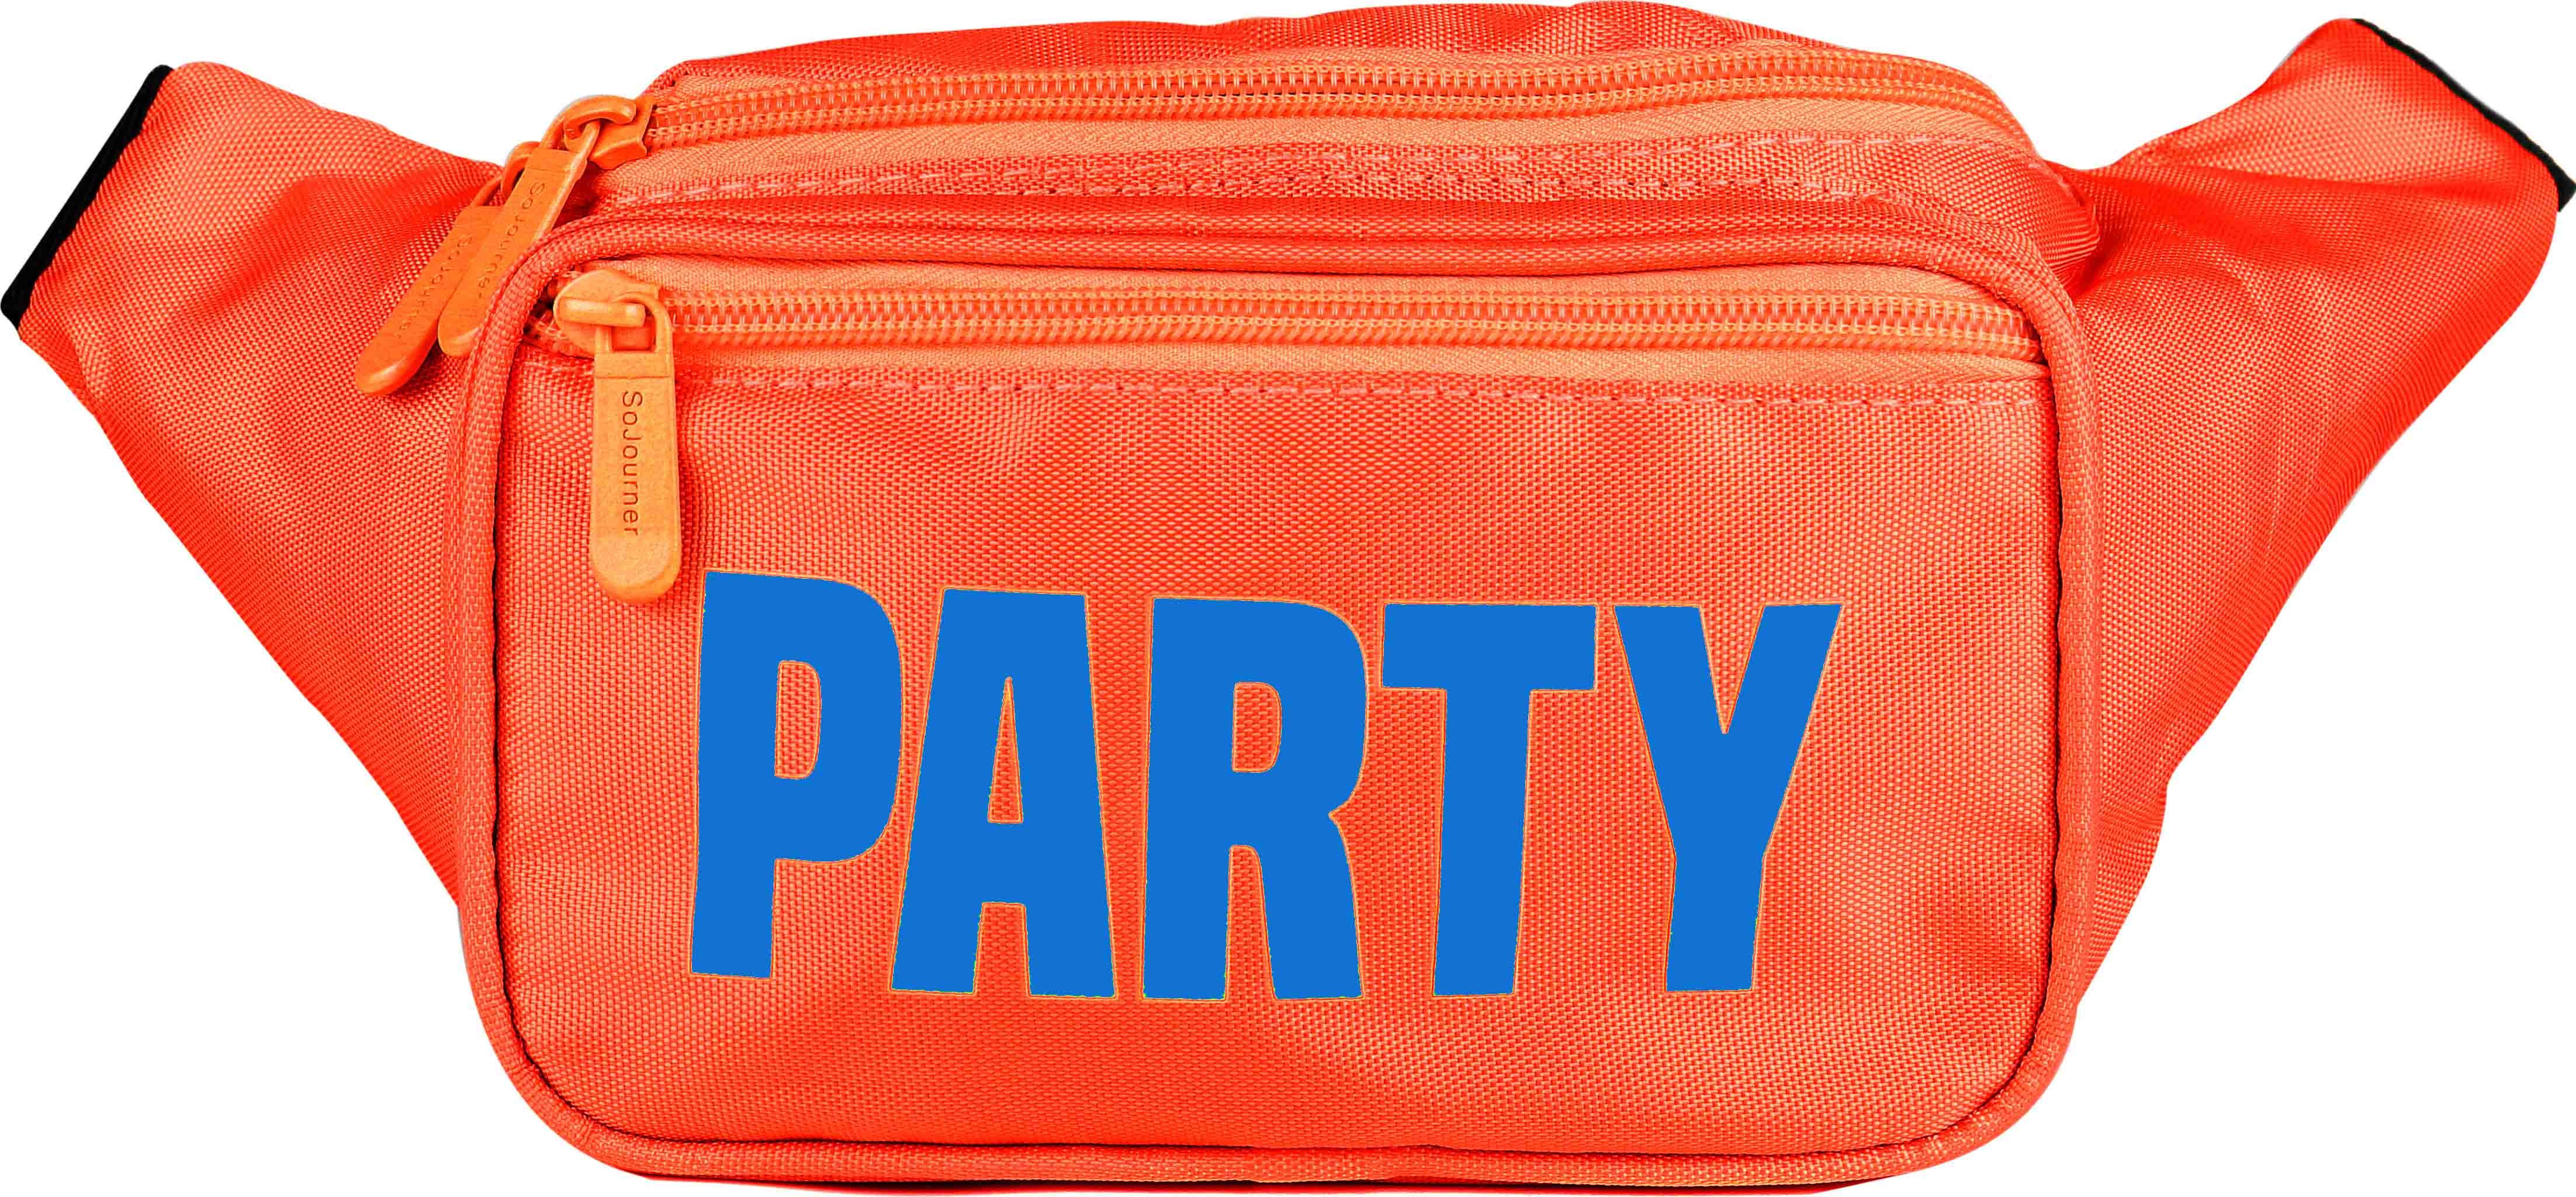 Orange Red Neon Party Fanny Pack | SoJourner Bags